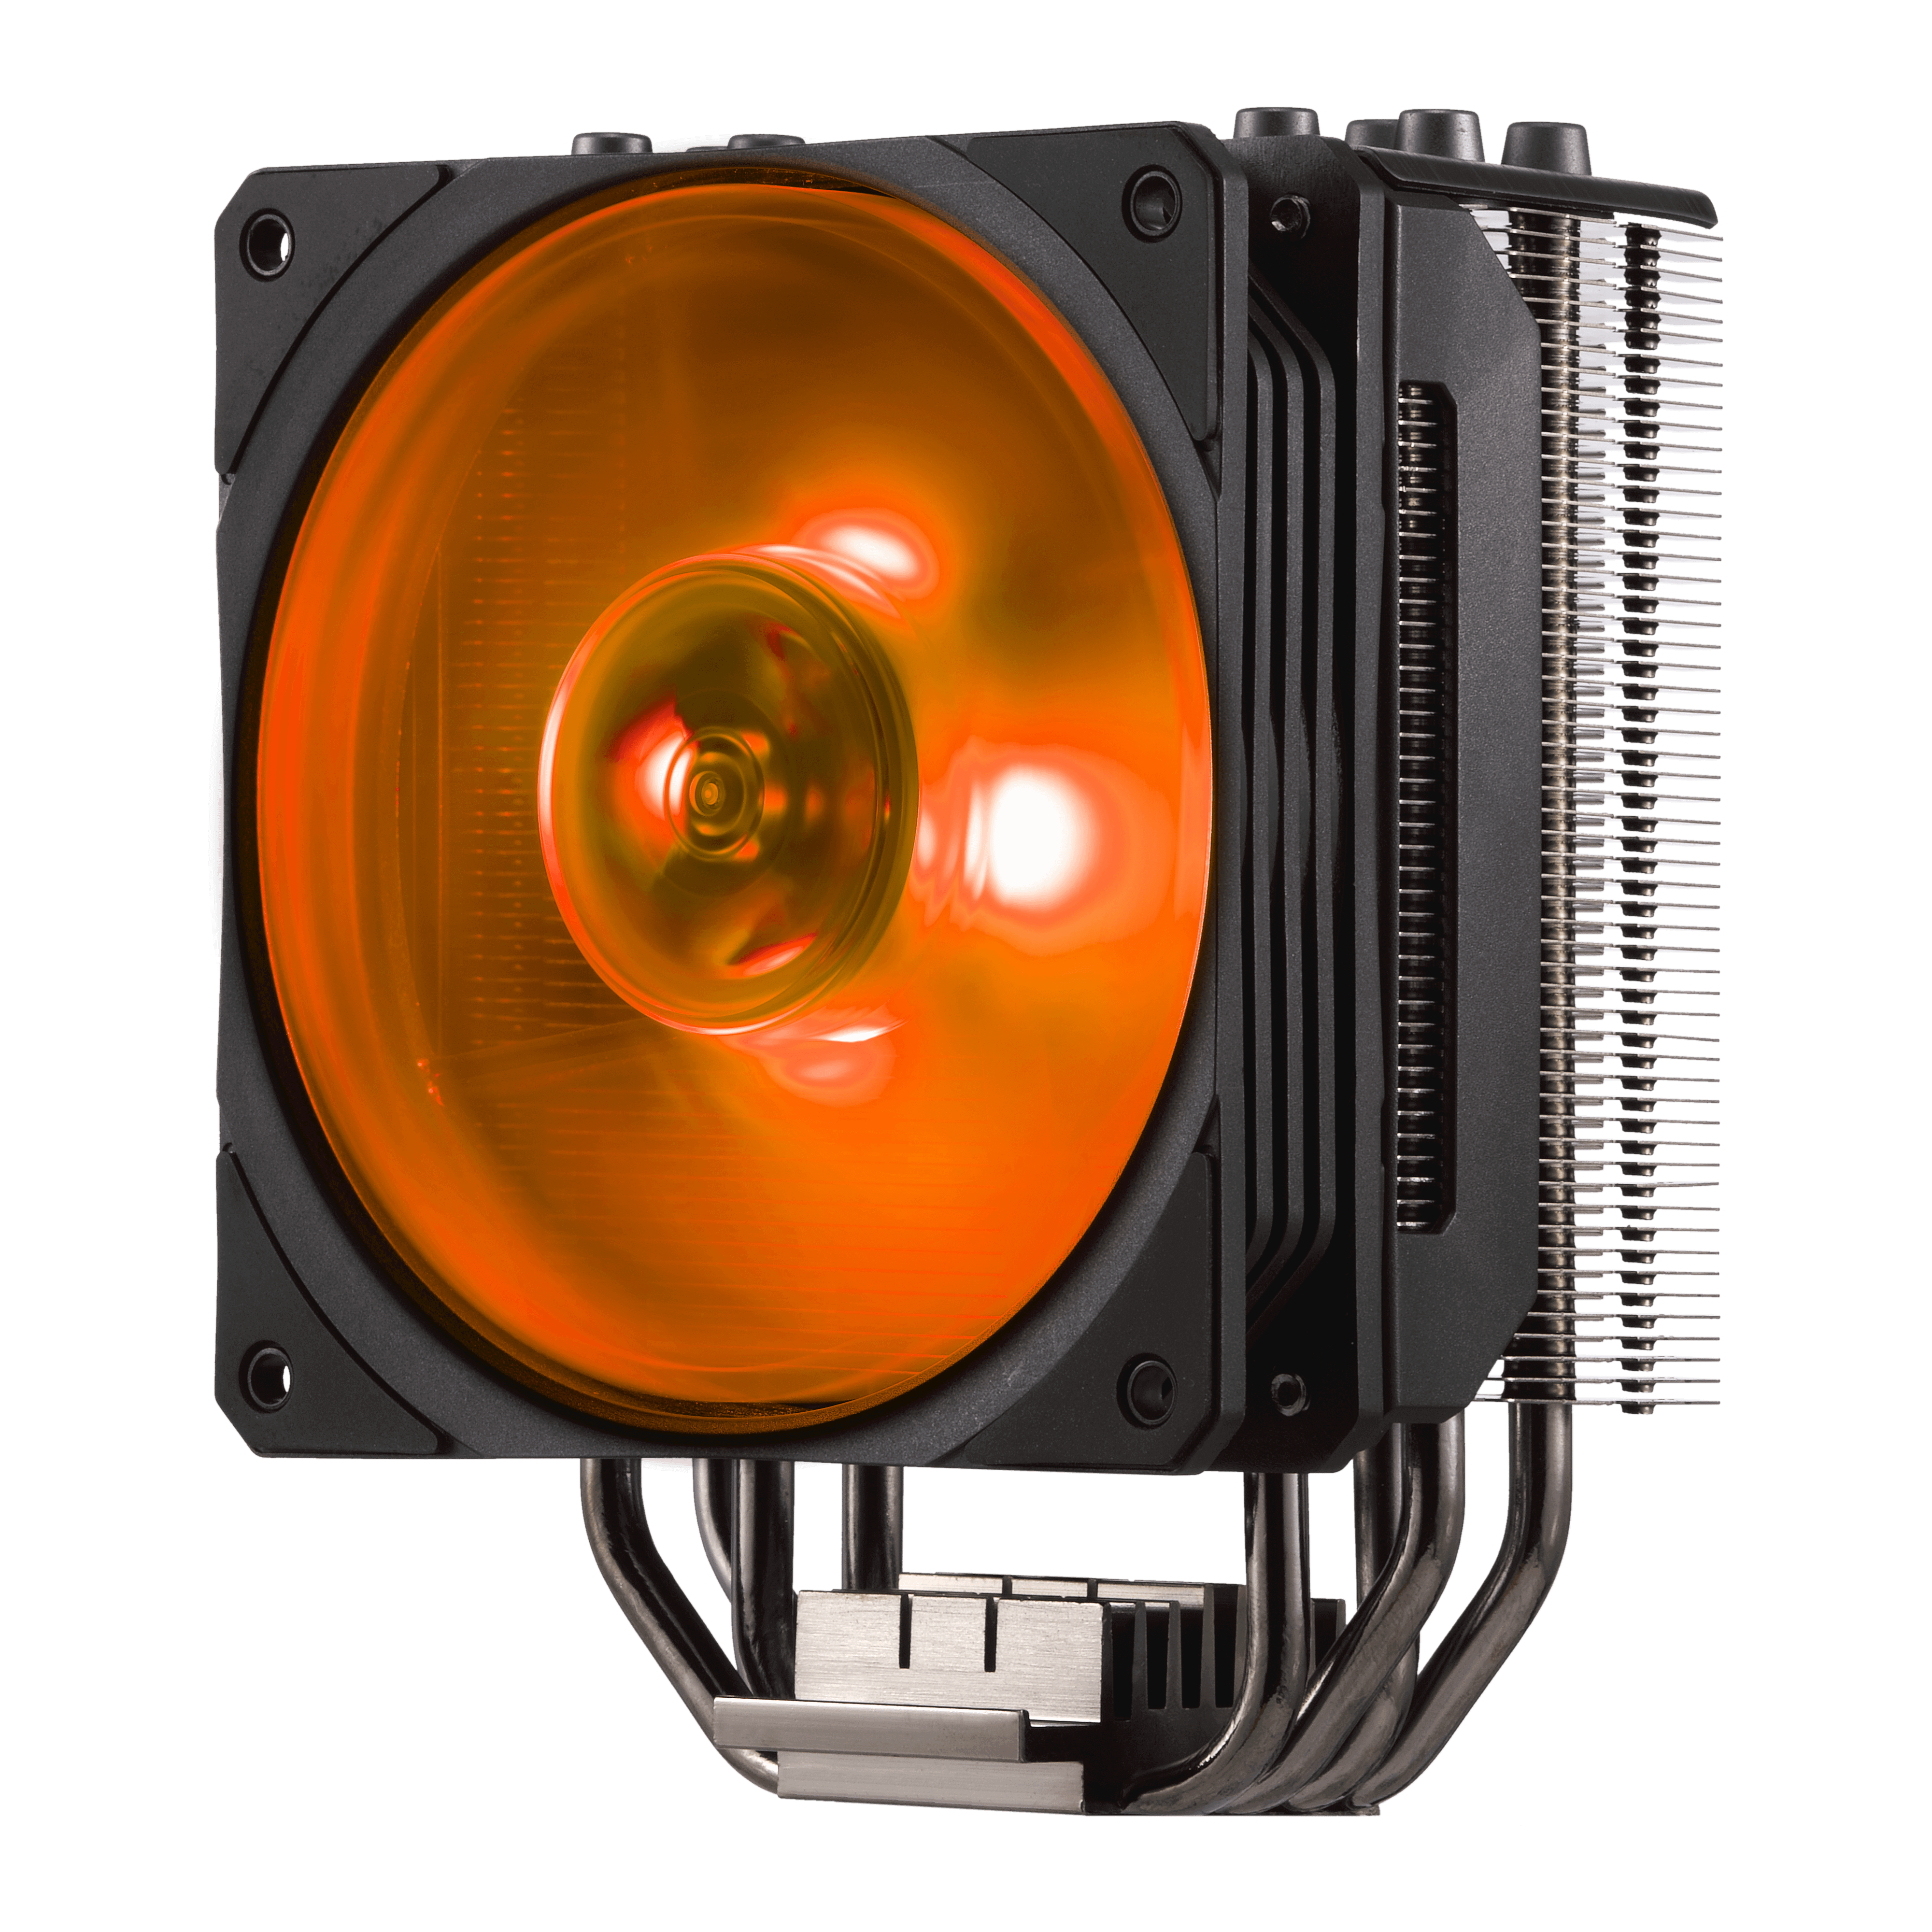  Cooler Master Hyper 212 Black CPU Air Cooler with Silencio Fan,  Gun-Metal Fins, and Copper Heat Pipes - For AMD Ryzen and Intel LGA CPUs :  Electronics